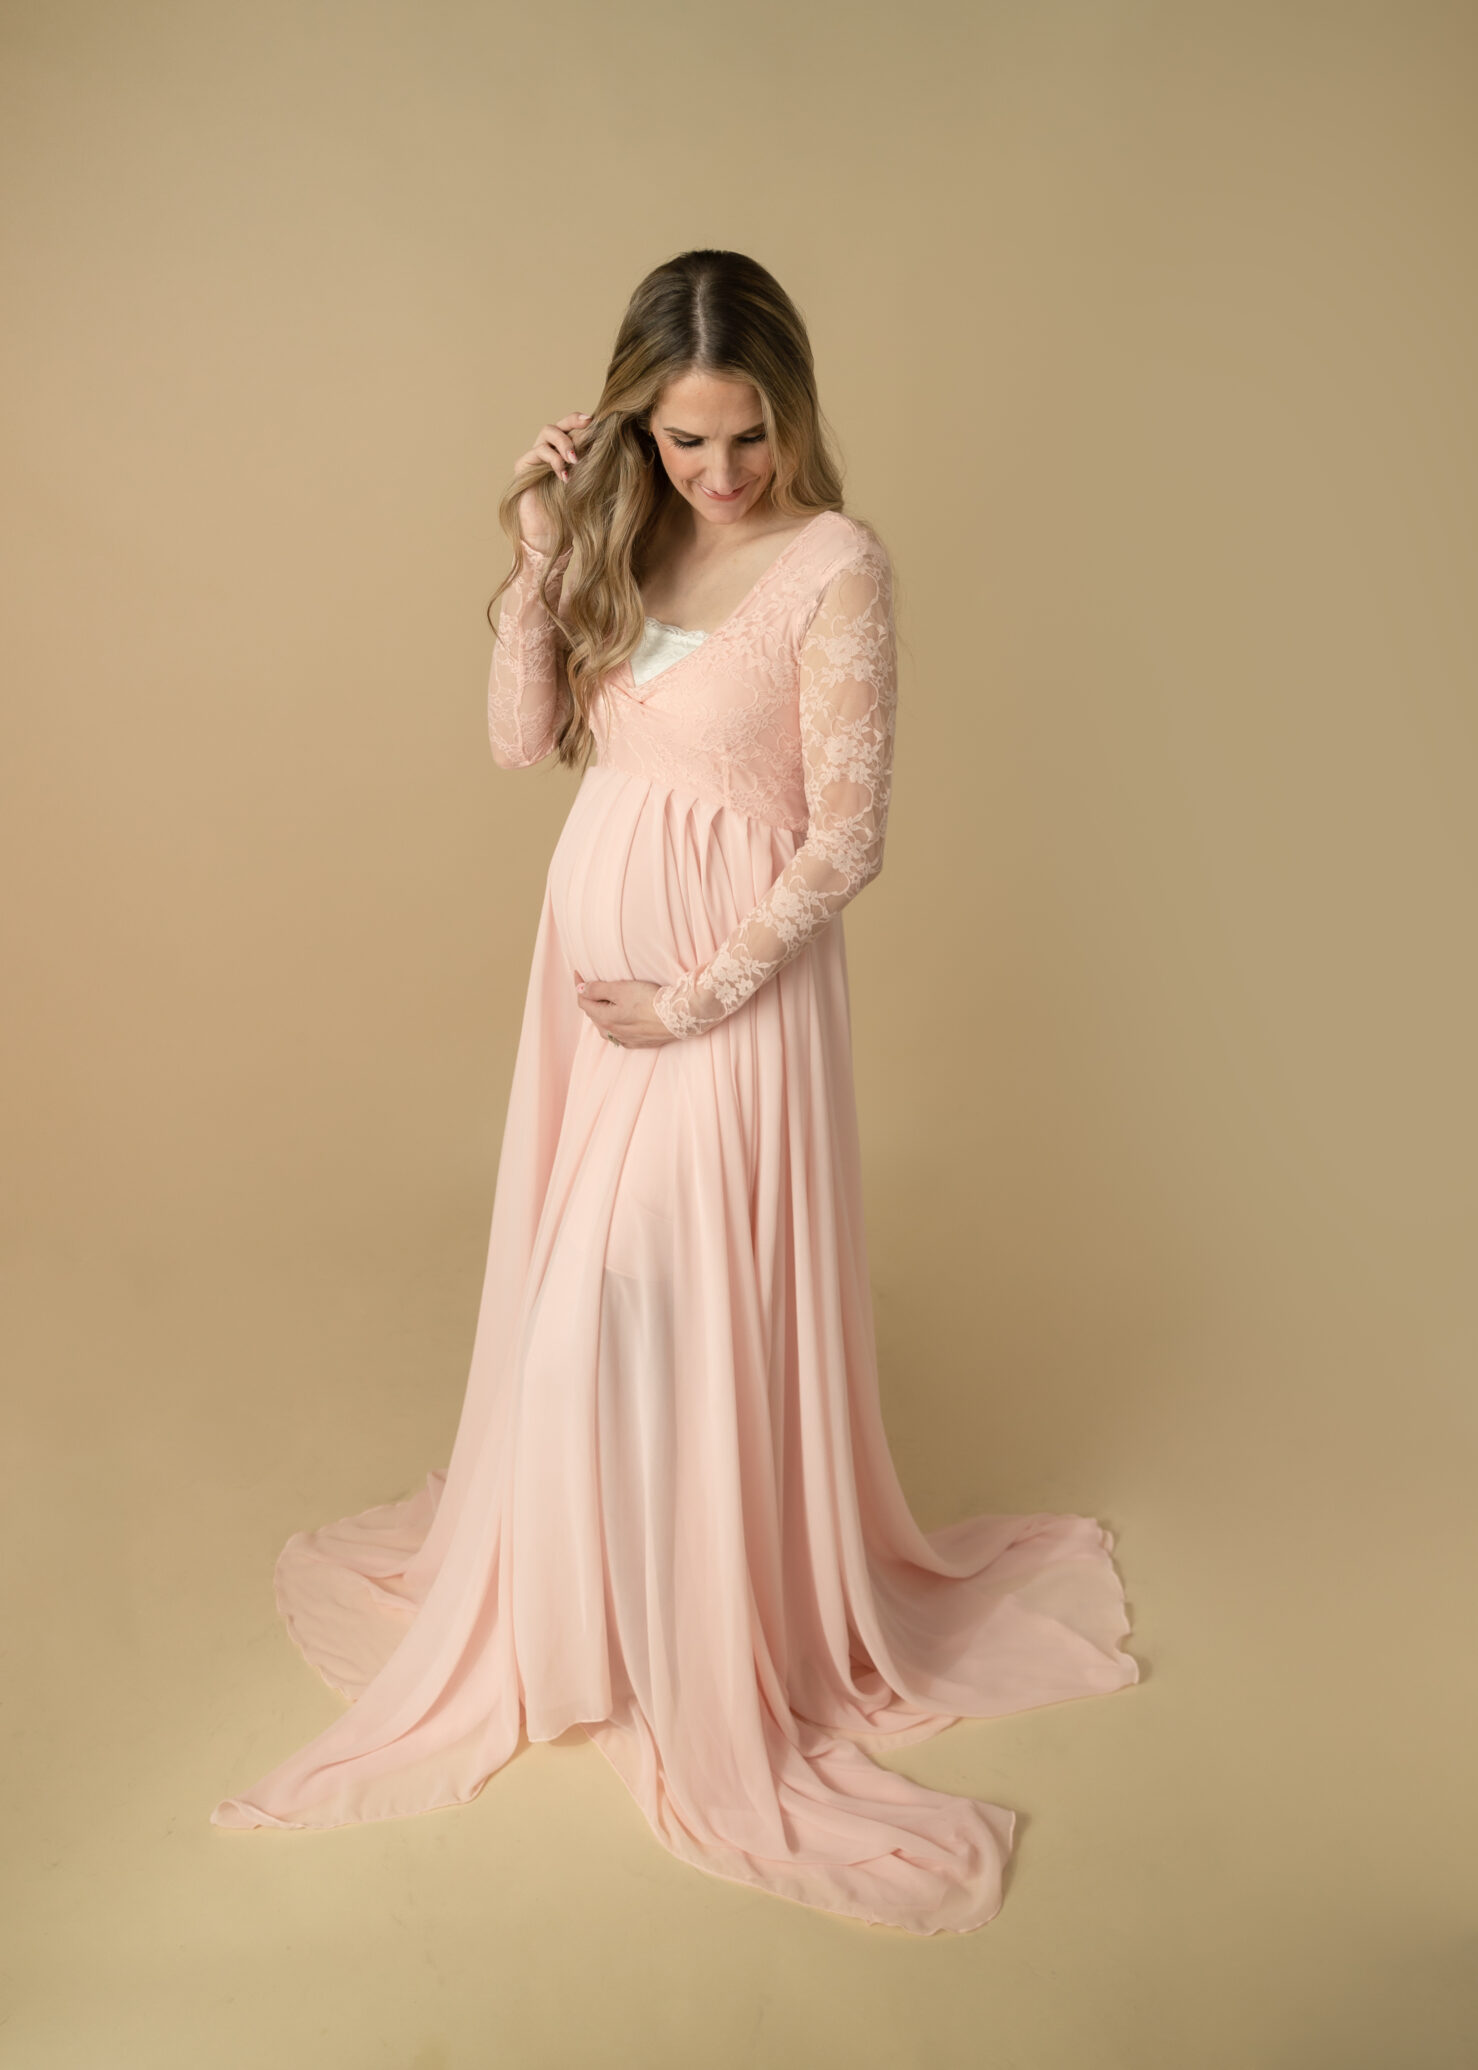 pink lace dress for maternity photo session